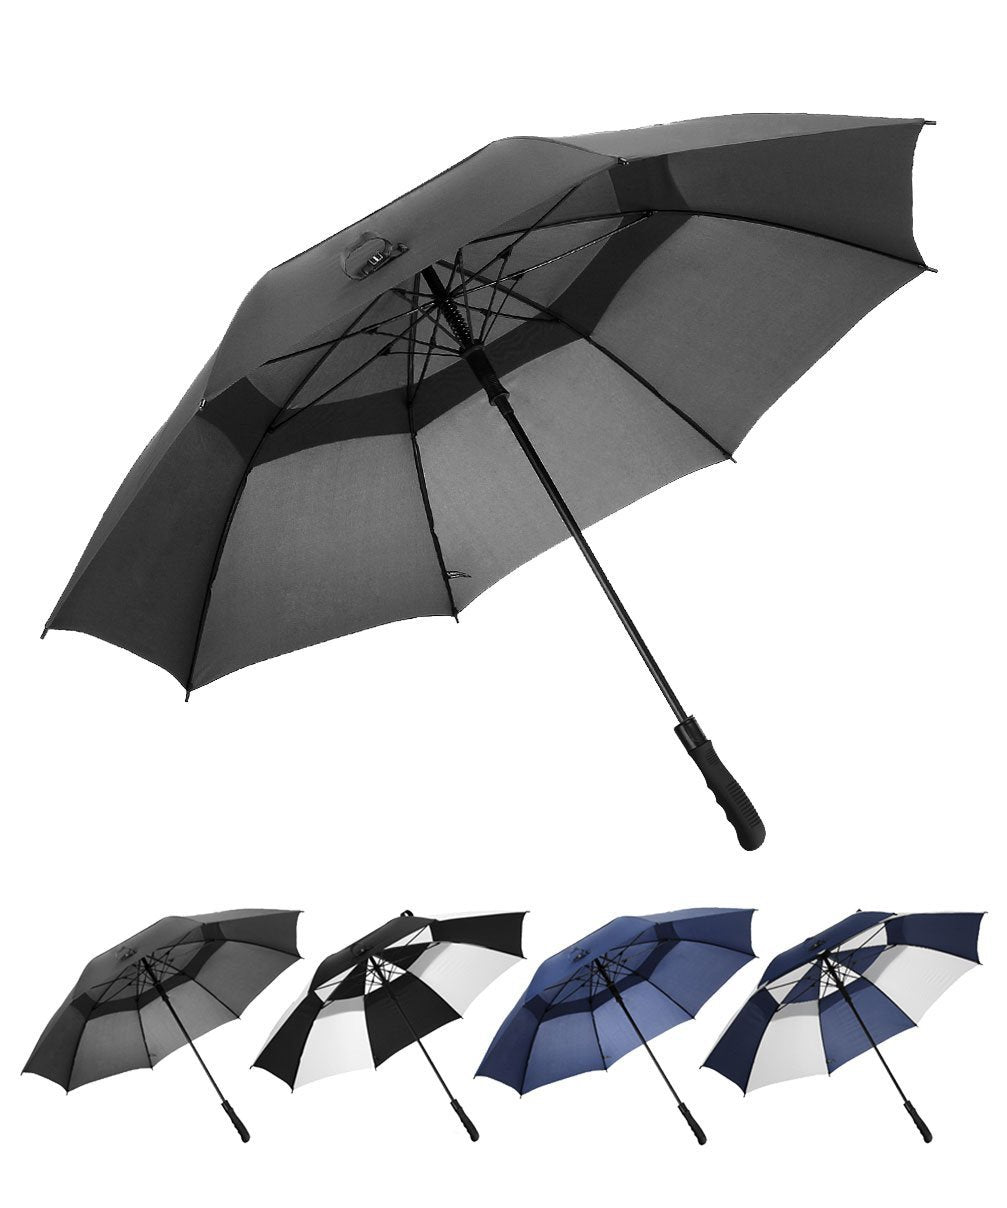 Golf Umbrella Windproof Large 68 Inch Stick Umbrella Double Canopy Vented Automatic Open for Men and Women - Black